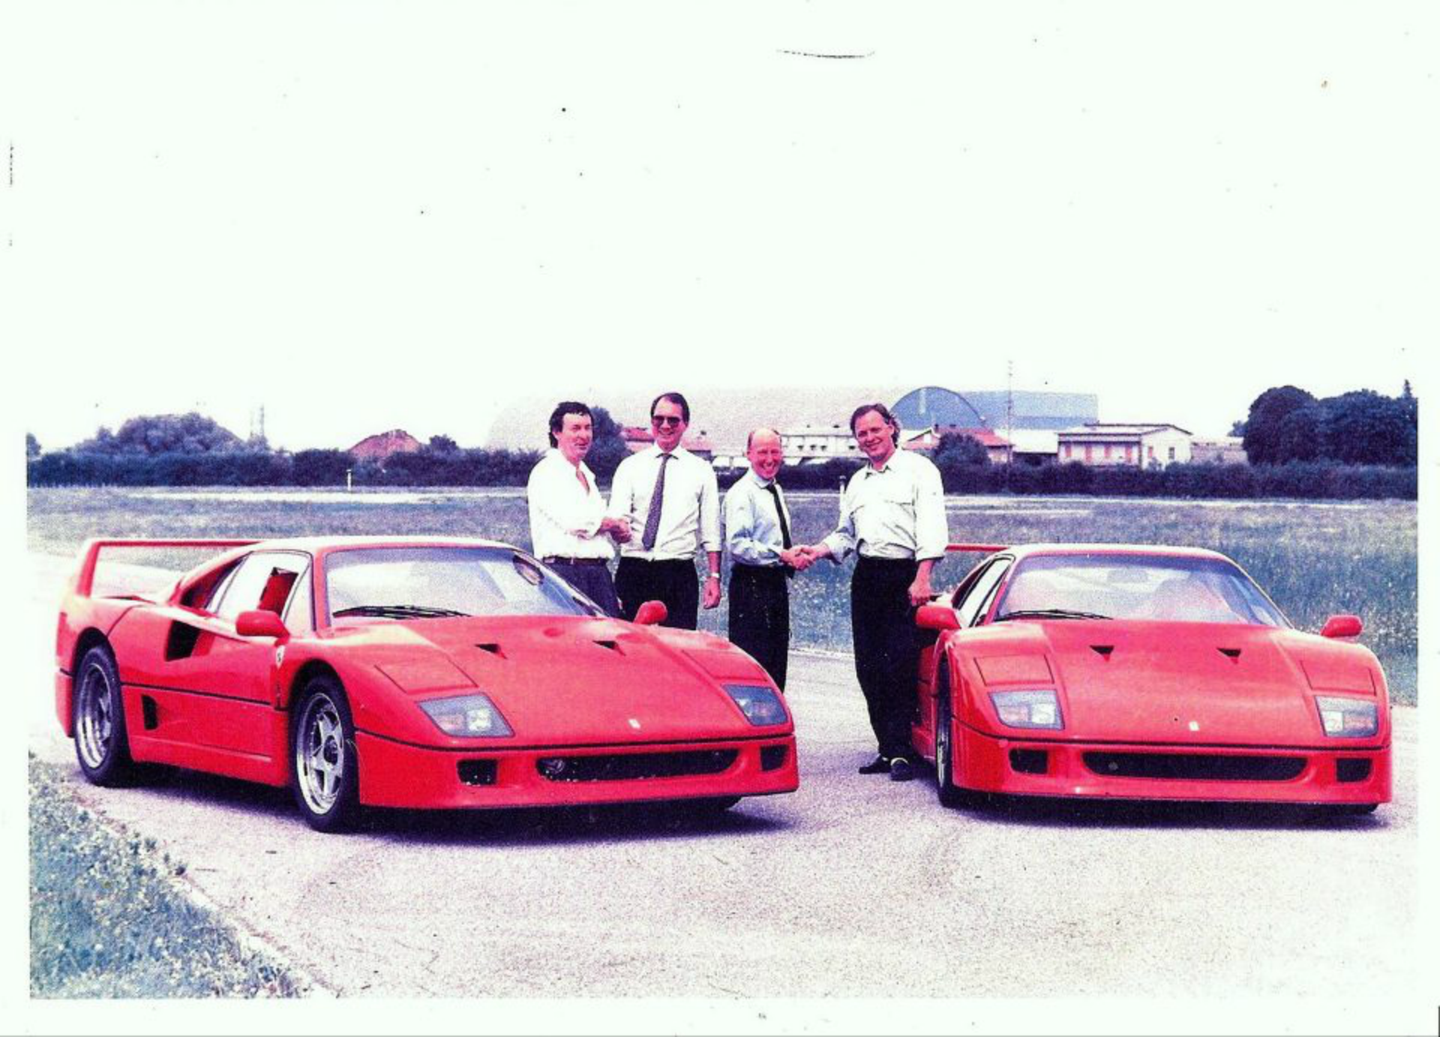 Pink Floyd Member’s Ferrari F40 Will Go up for Auction at Goodwood